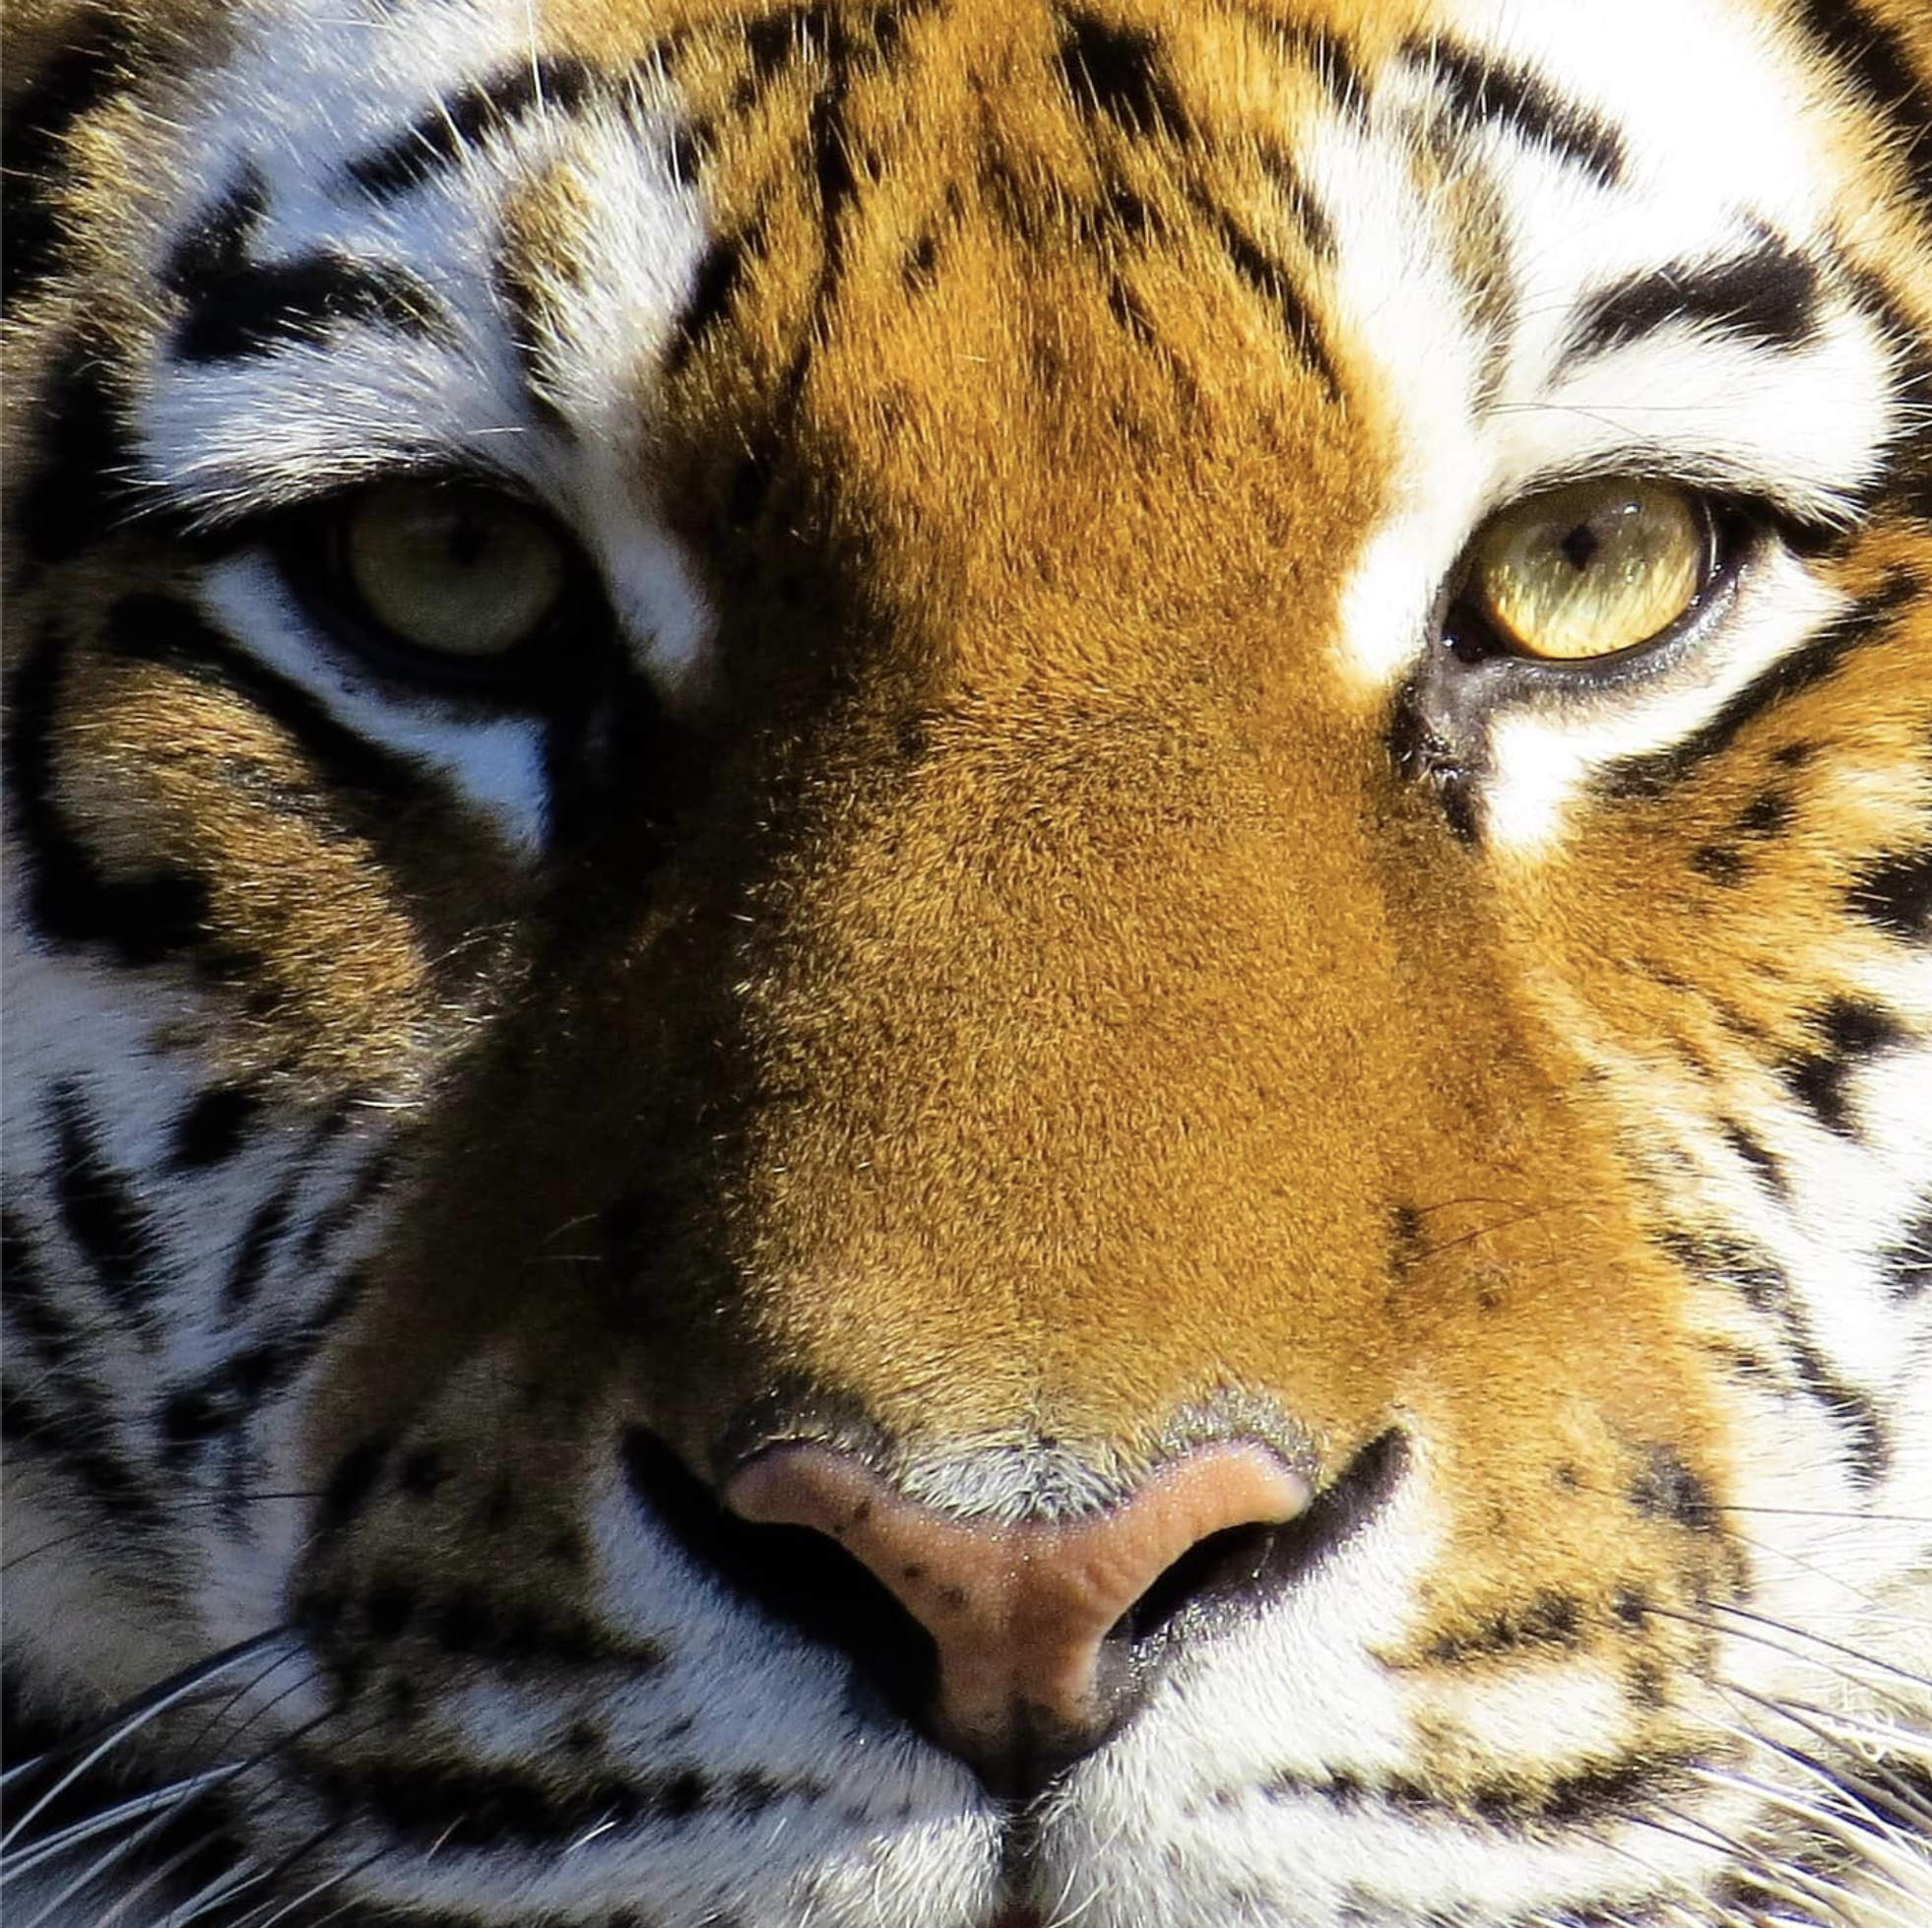 Heart of the Tiger: Embracing Personal Power